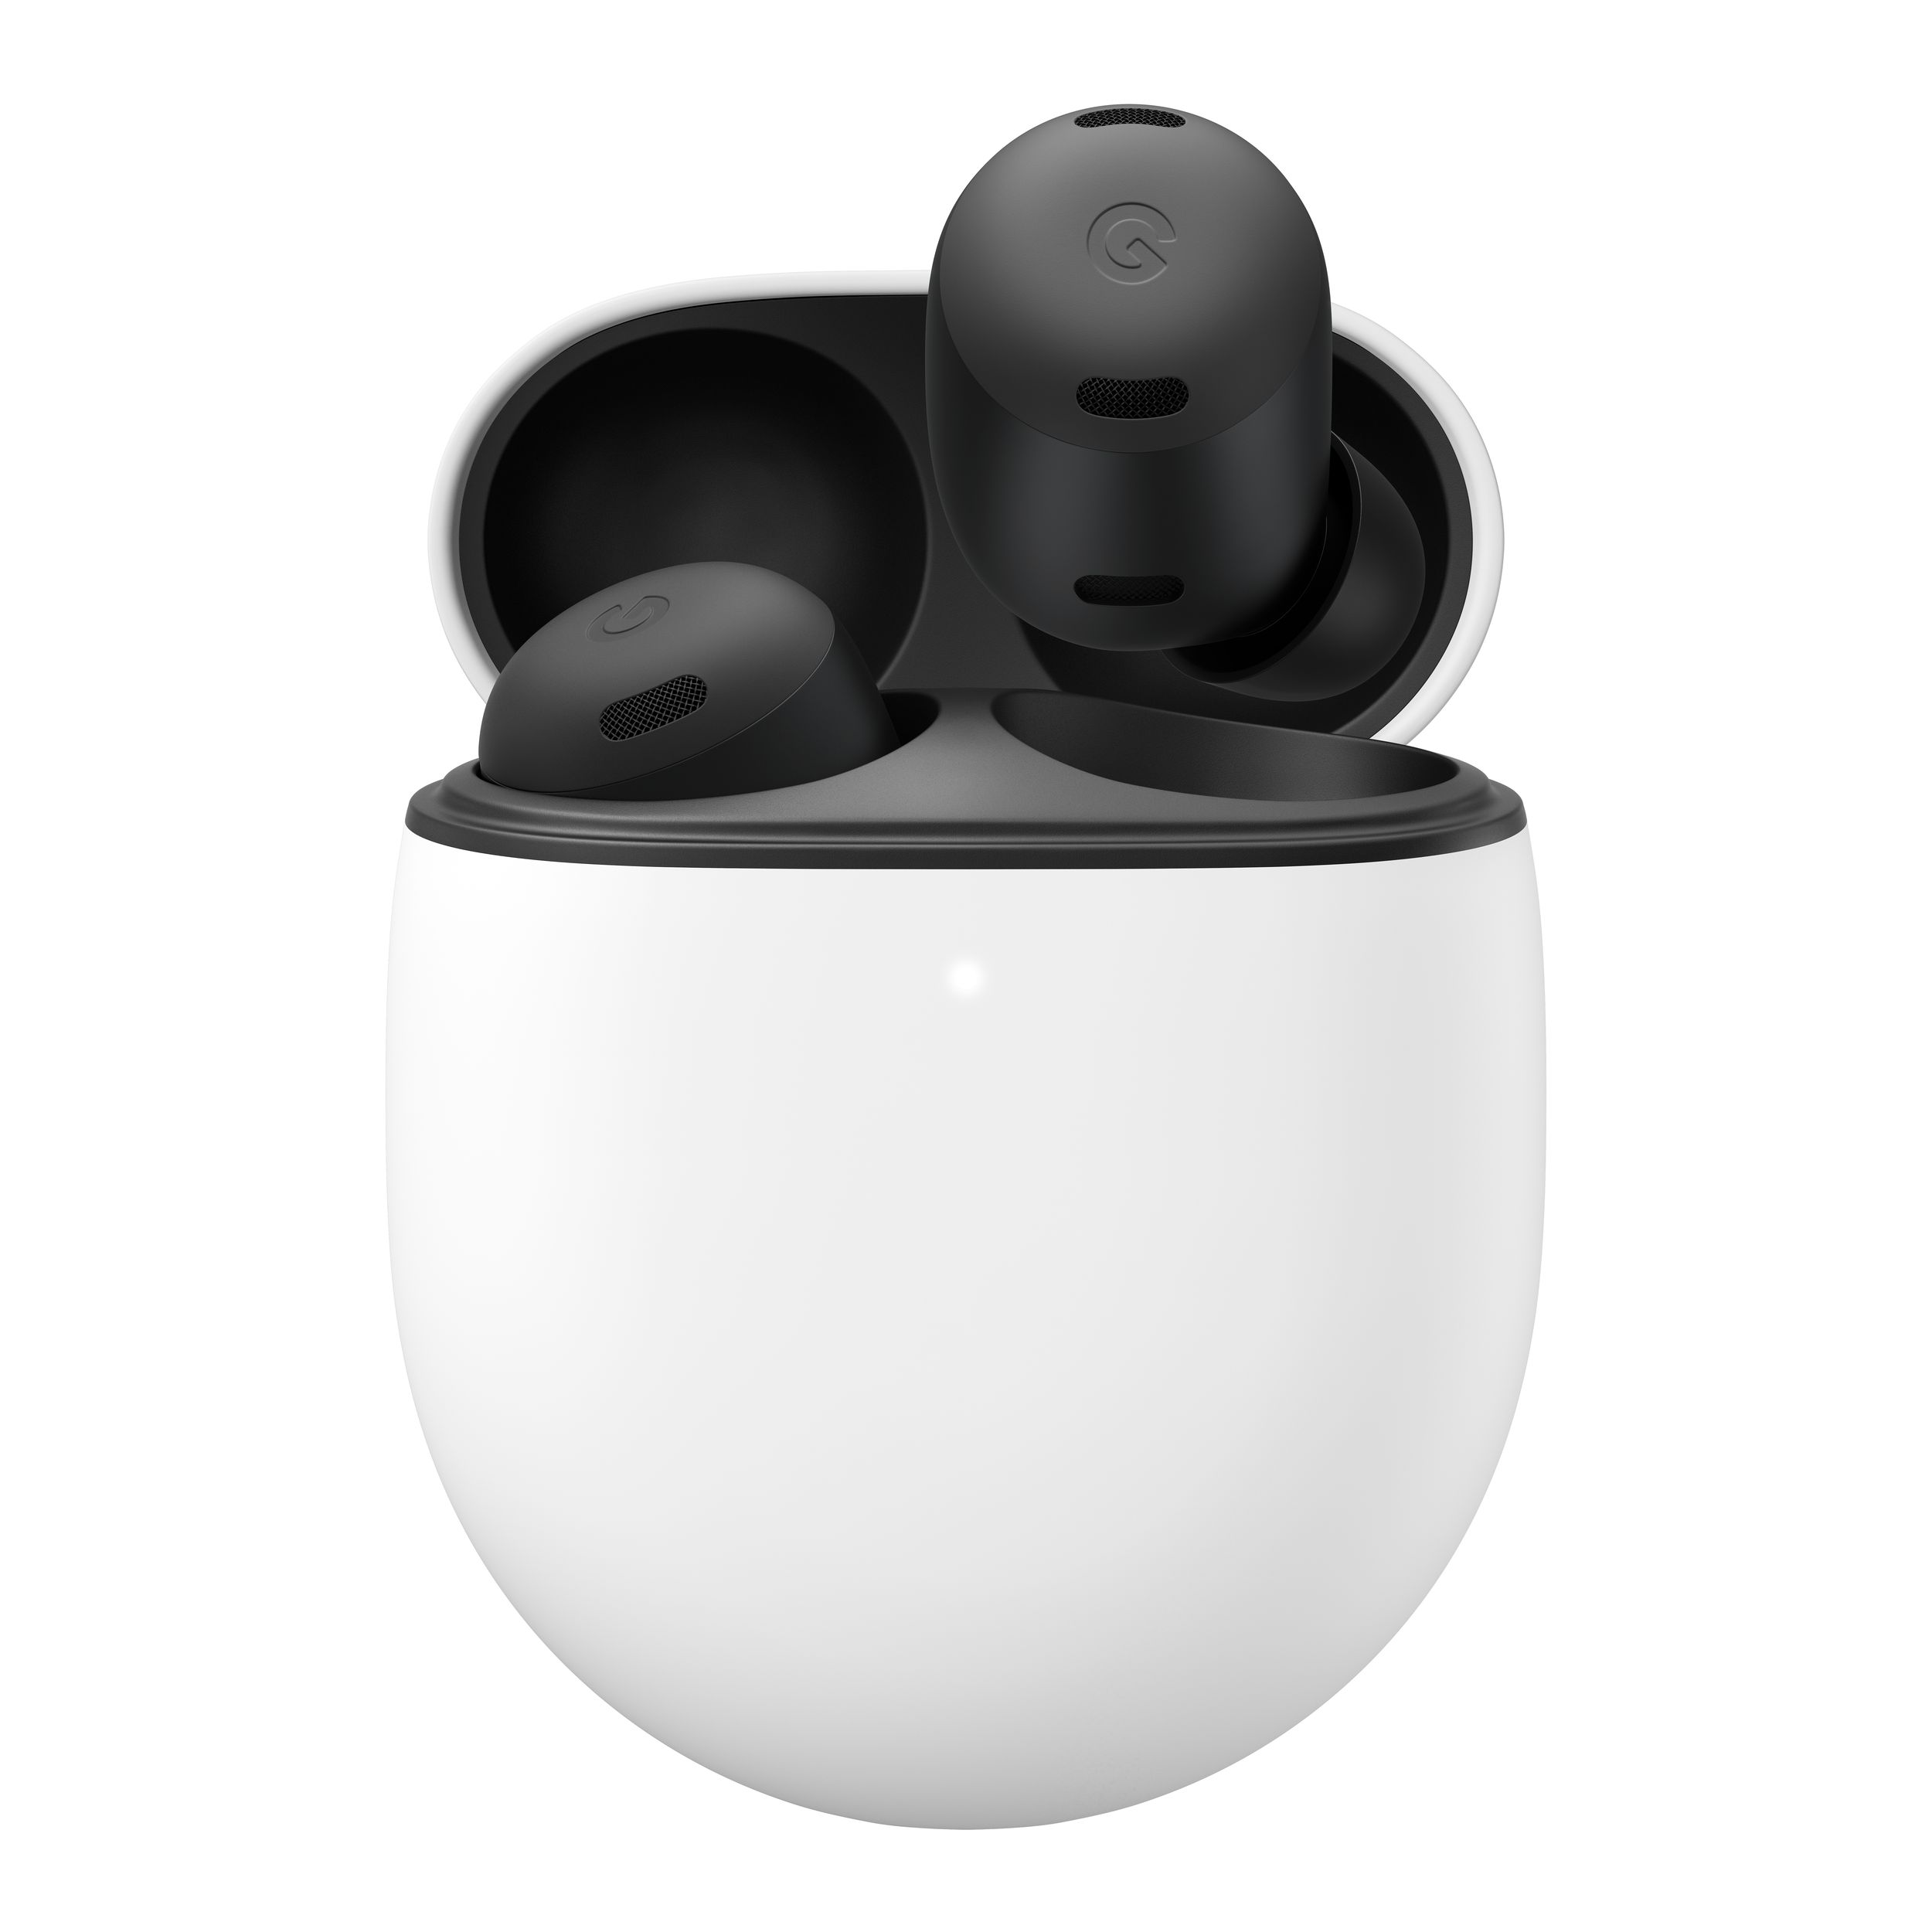 Image of Google Pixel Buds Pro - Charcoal